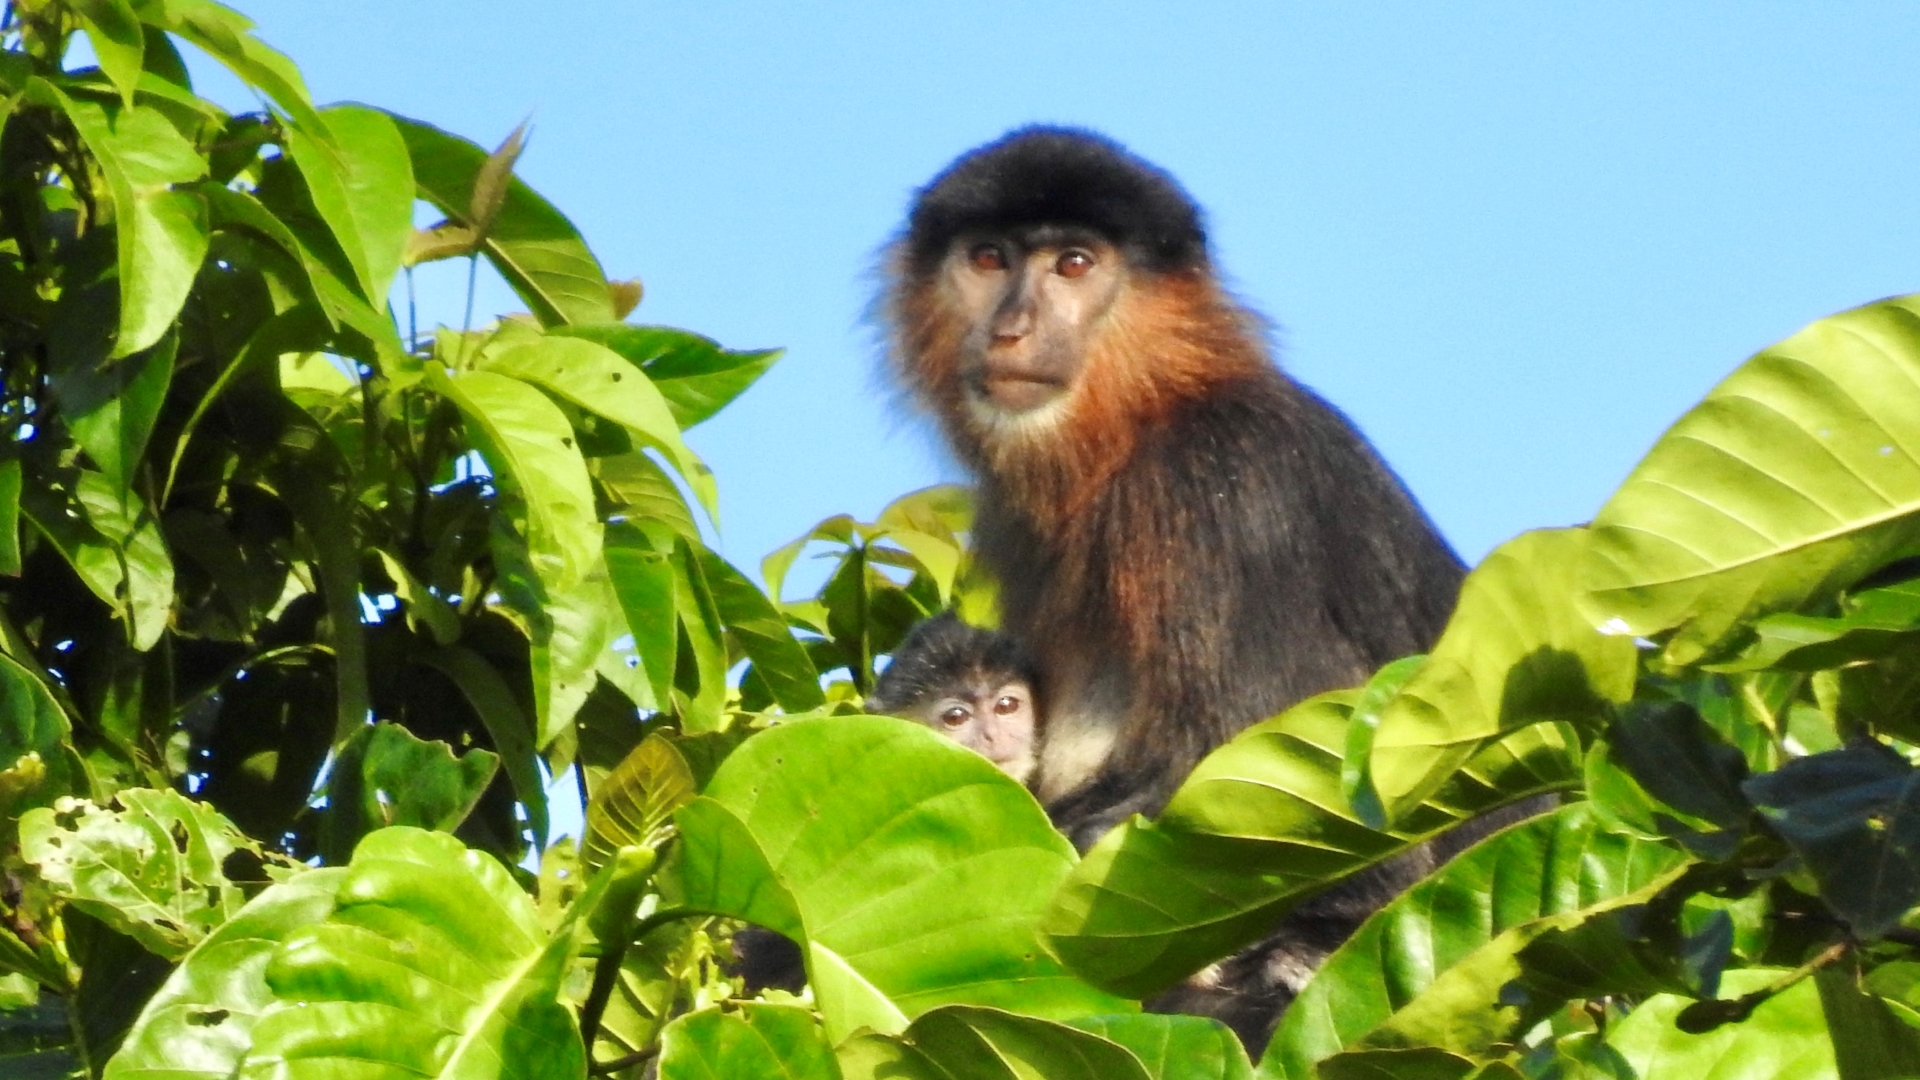 How Many Types of Monkeys Are There in the World?